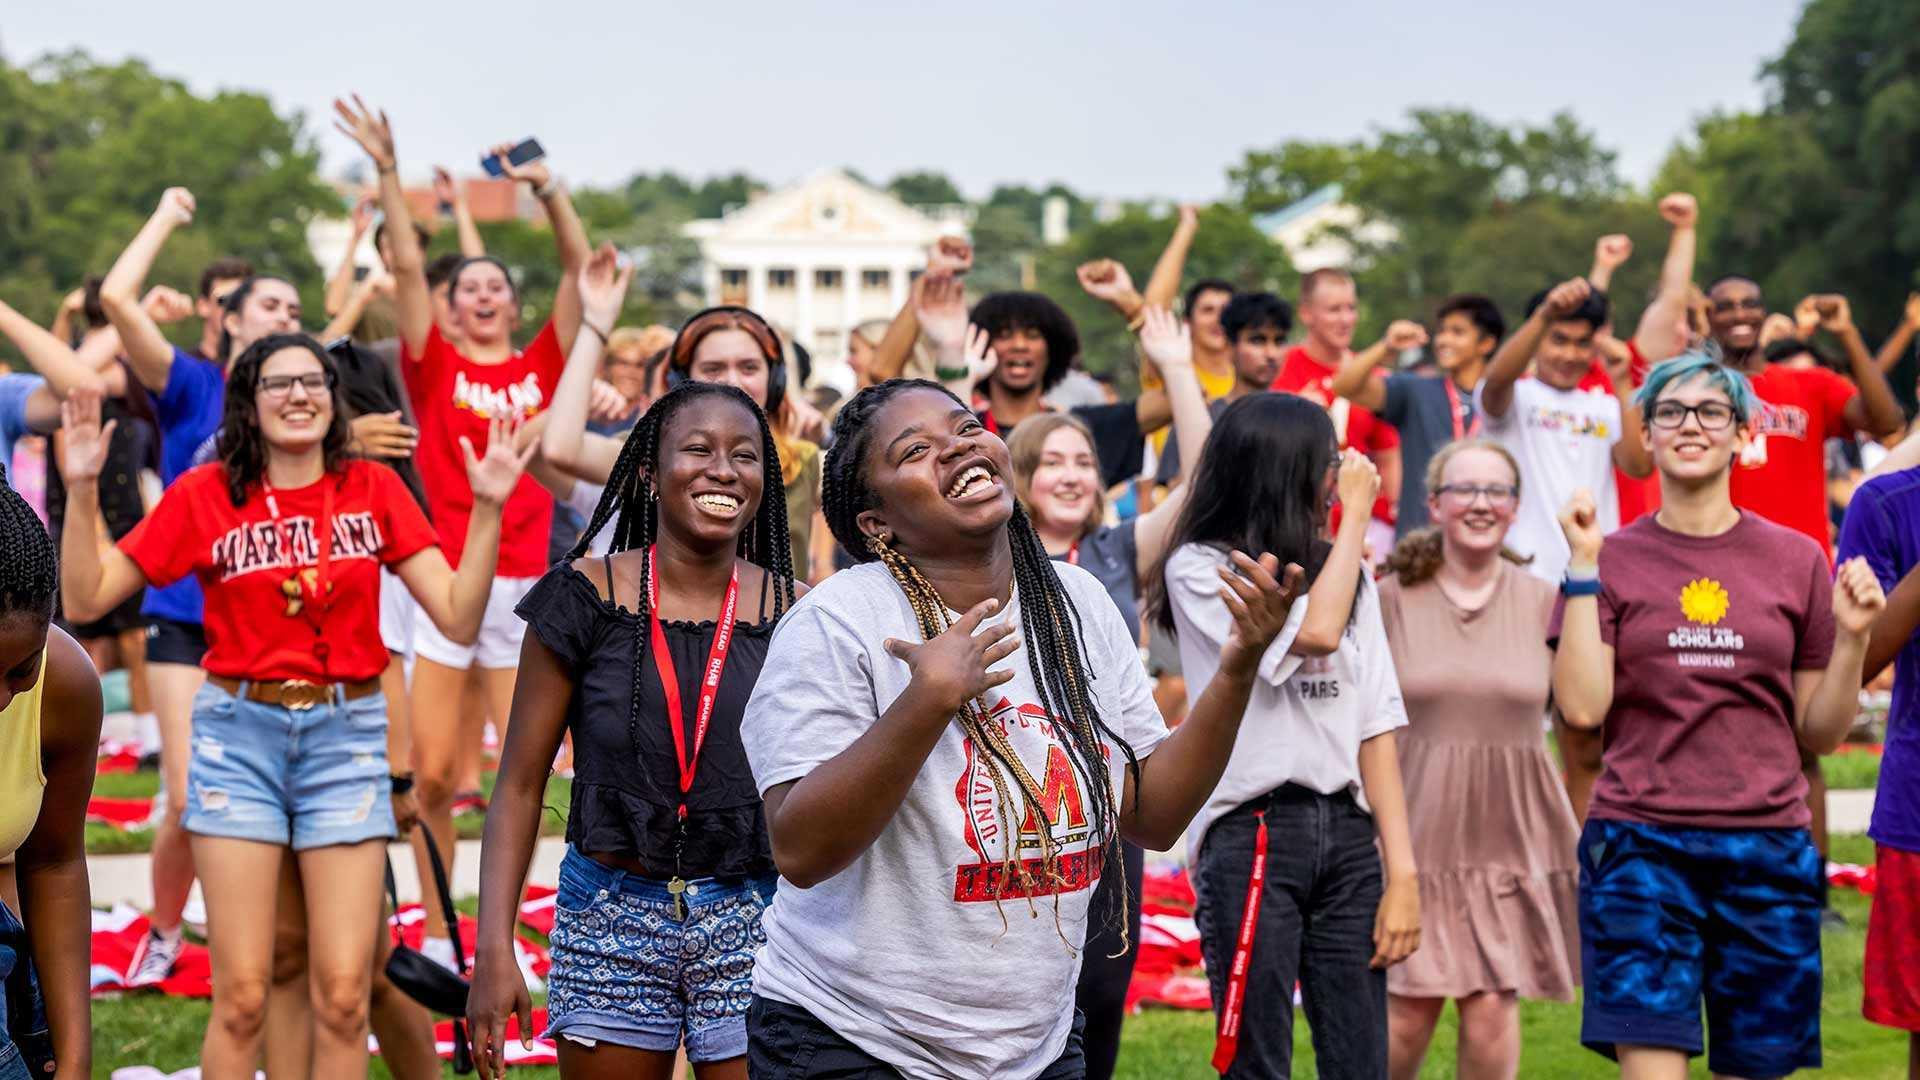 Students cheering at New Student Welcome